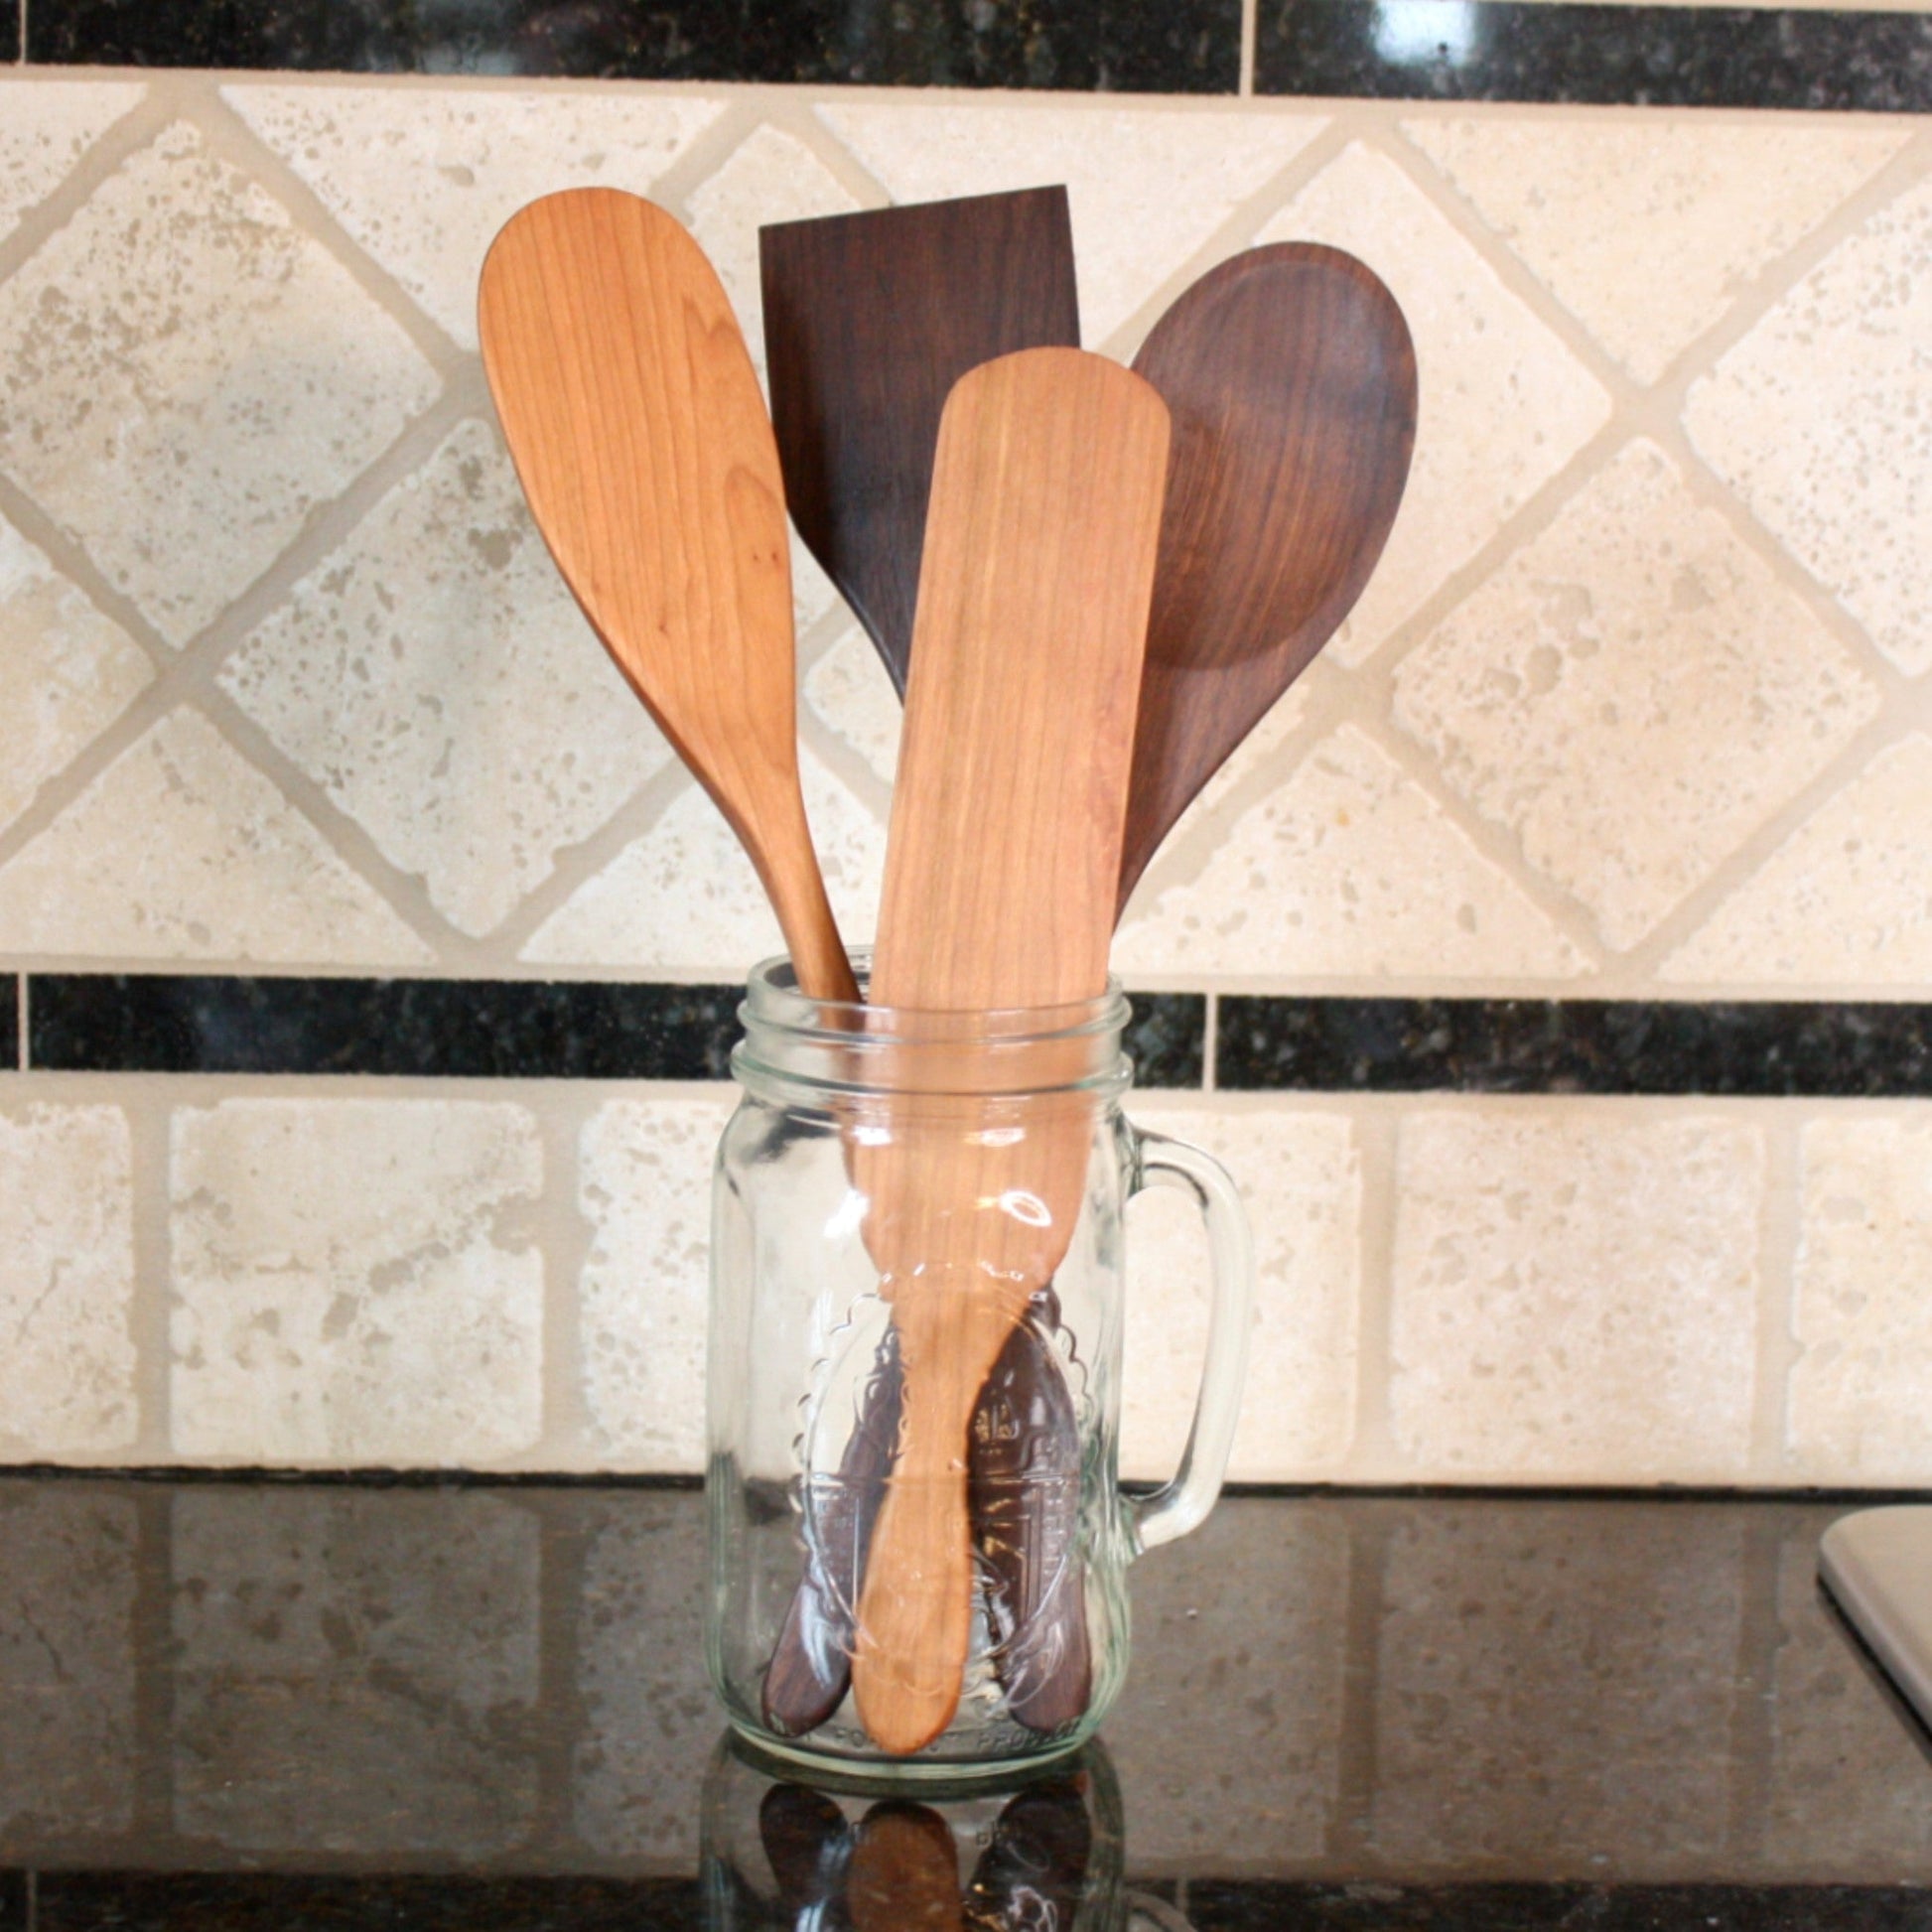 Cooking Utensil Set Made in USA